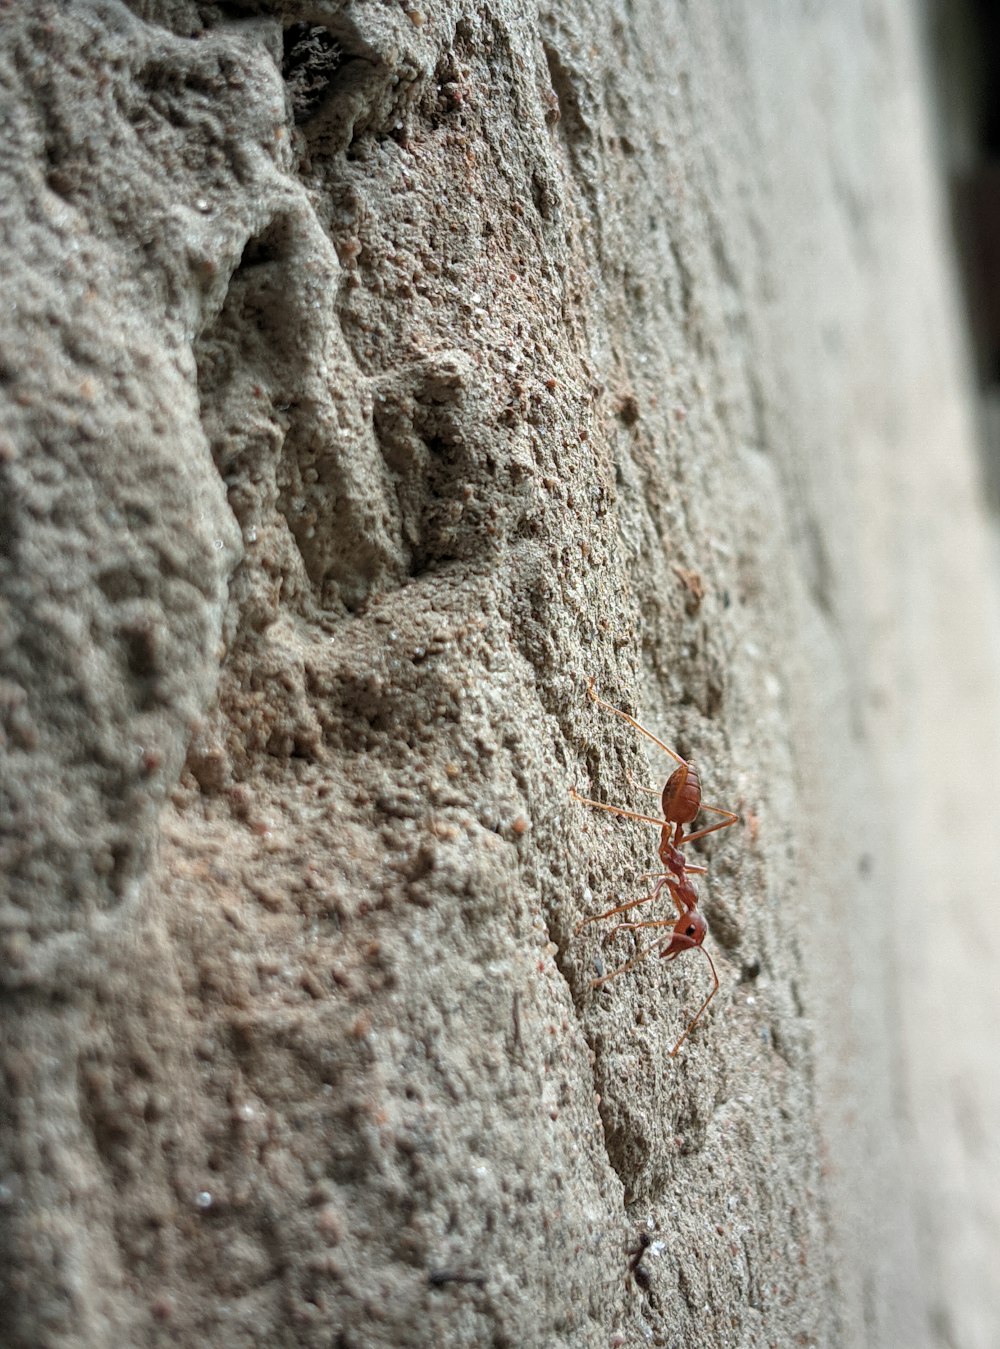 a close up of a rock with a bug crawling on it